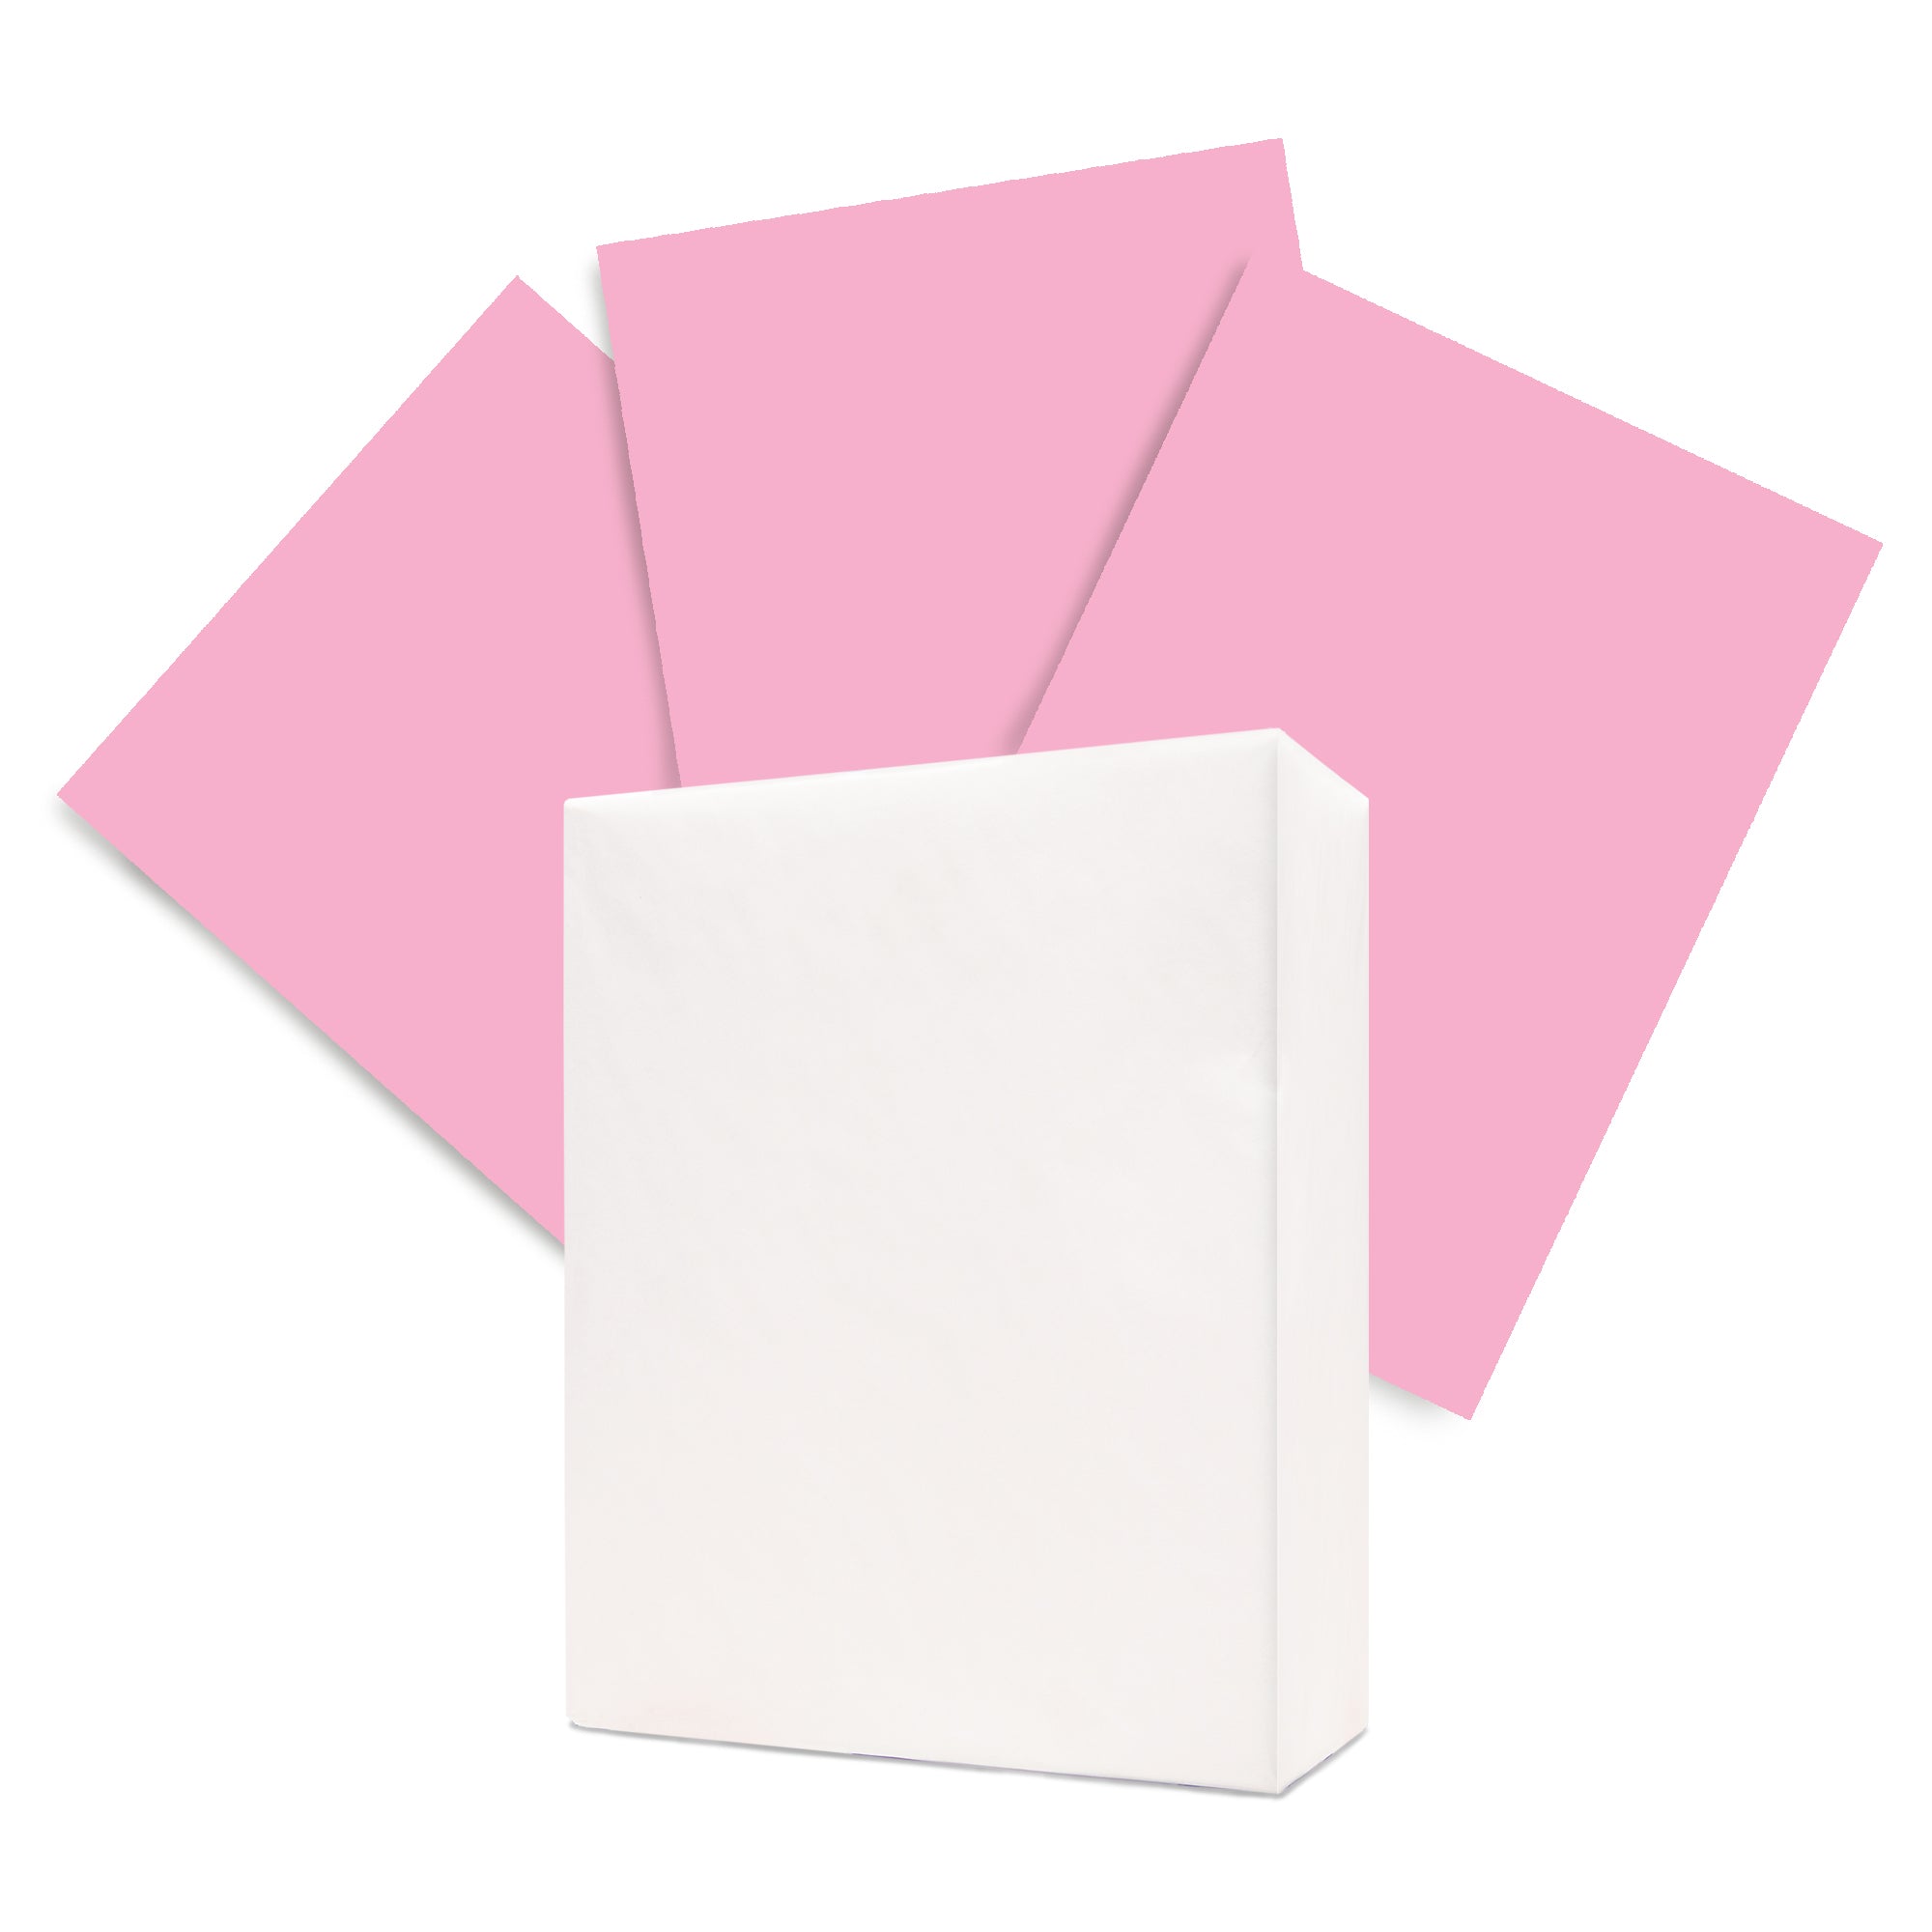 MyOfficeInnovations Pastel Colored Copy Paper 8 1/2 x 11 Lilac 500 Per  Ream (14782) 678826